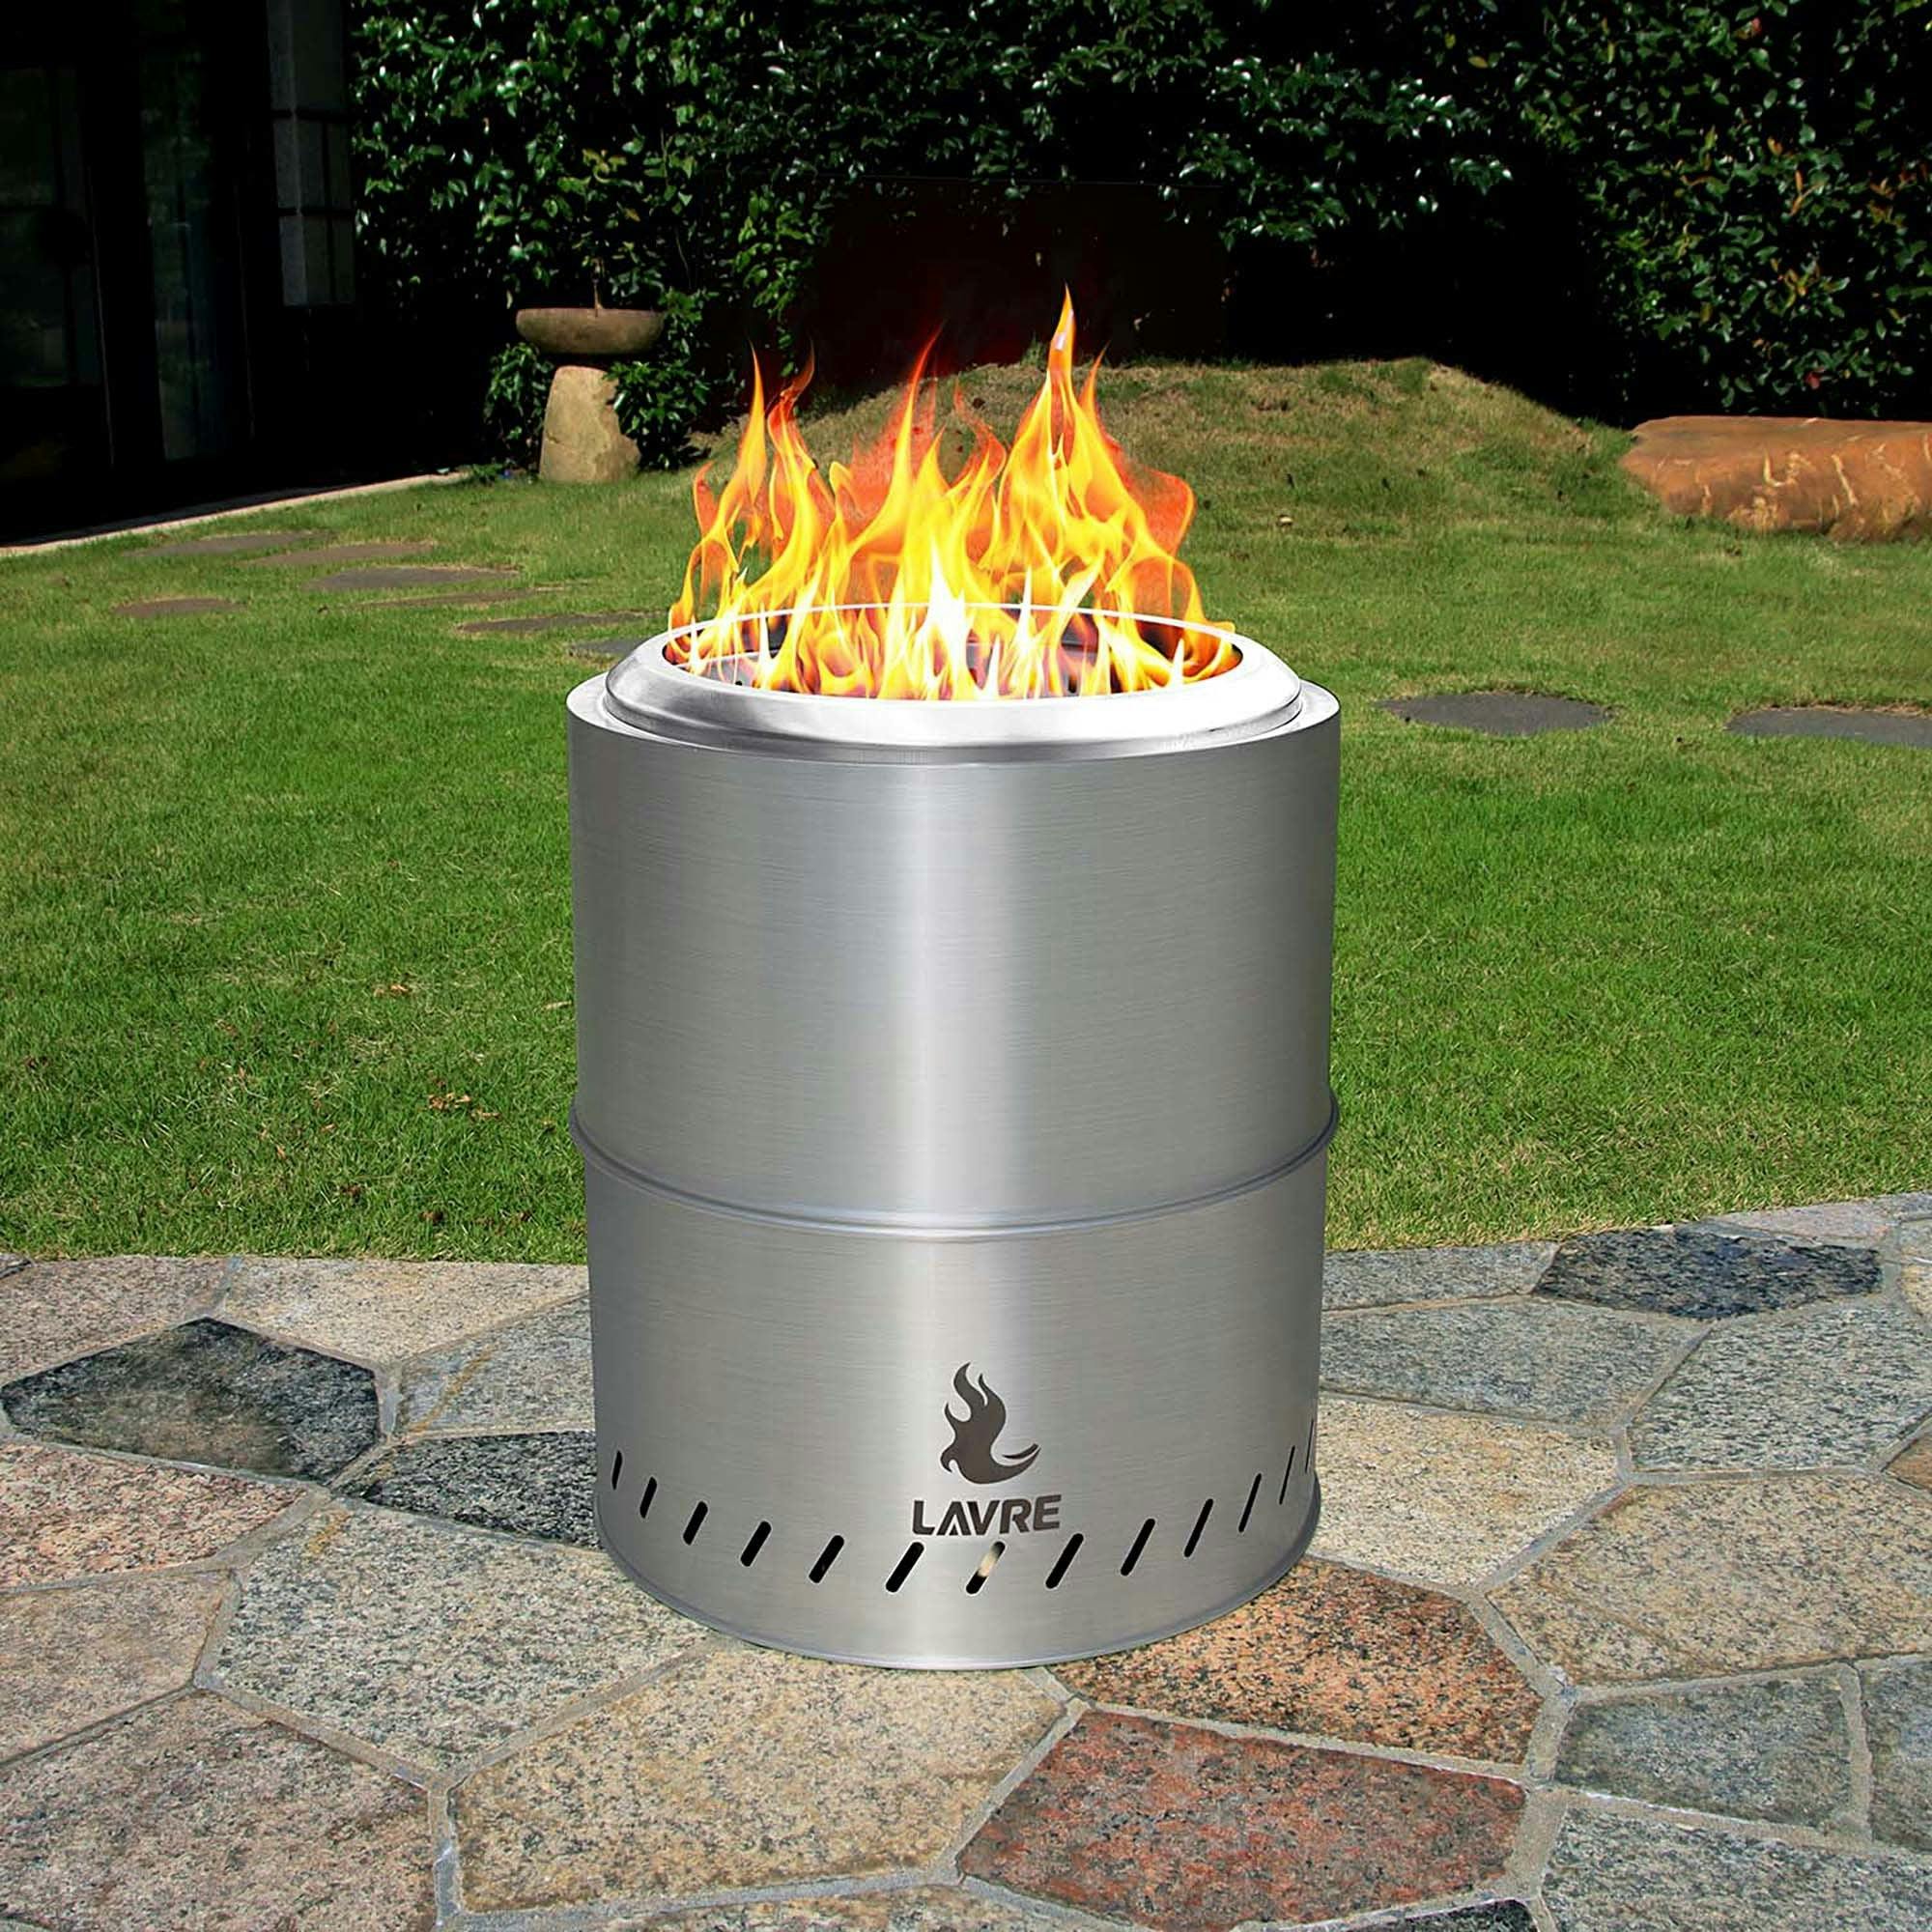 15 inch Smokeless Fire Pit Outdoor Wood Burning Portable Fire Pit Stainless Steel - dspic_7ad11e56-4344-49b8-9ea8-c562cdfae844